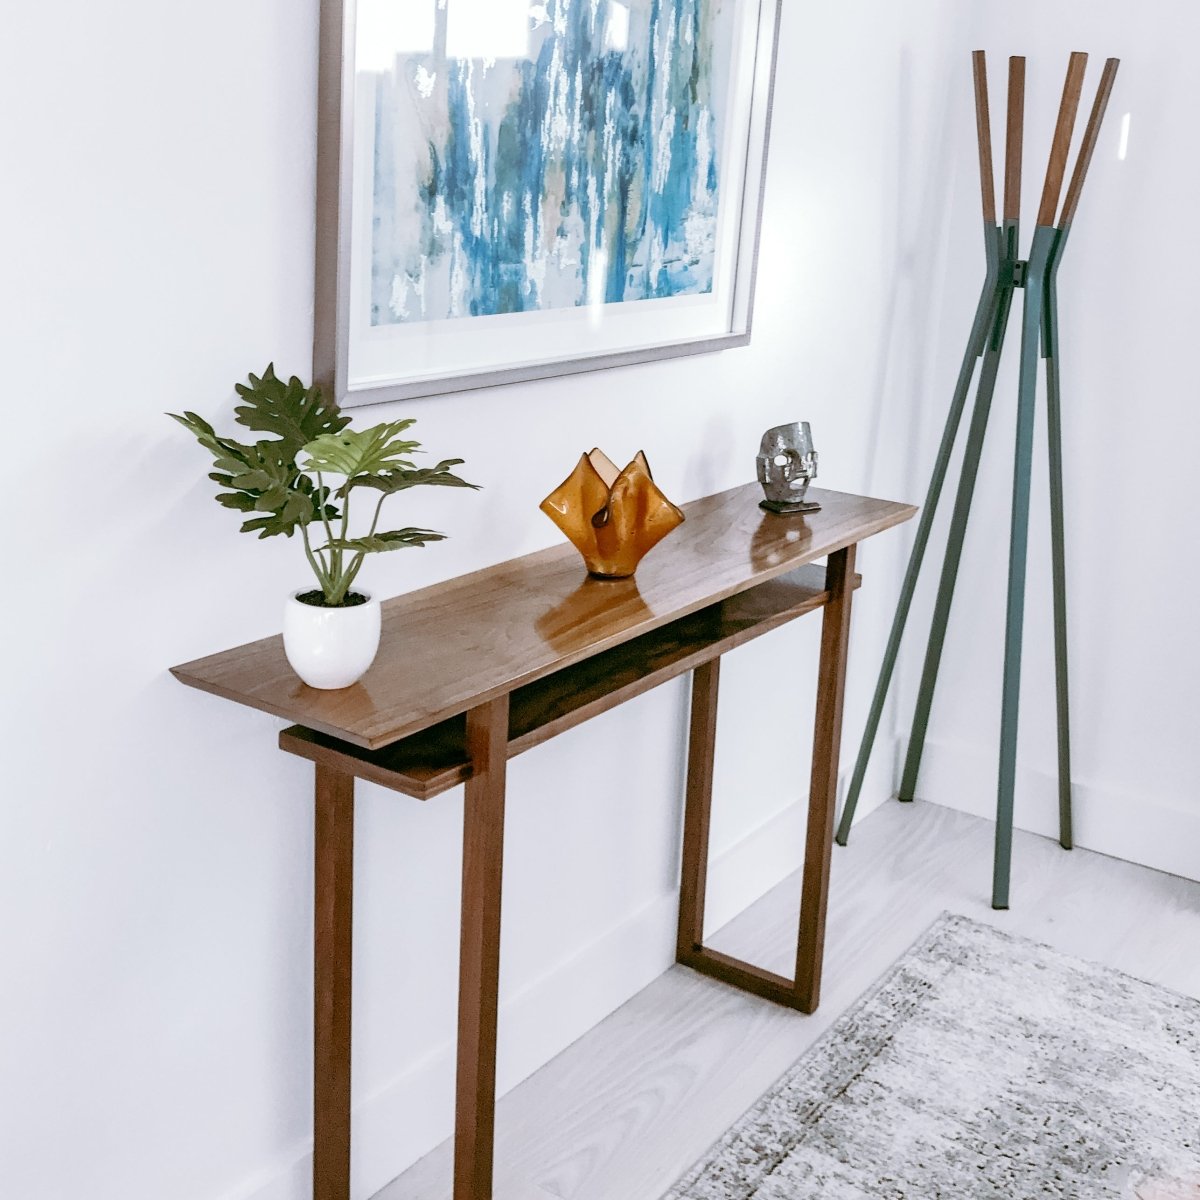 A modern entryway console table handcrafted from solid walnut wood by Mokuzai Furniture.